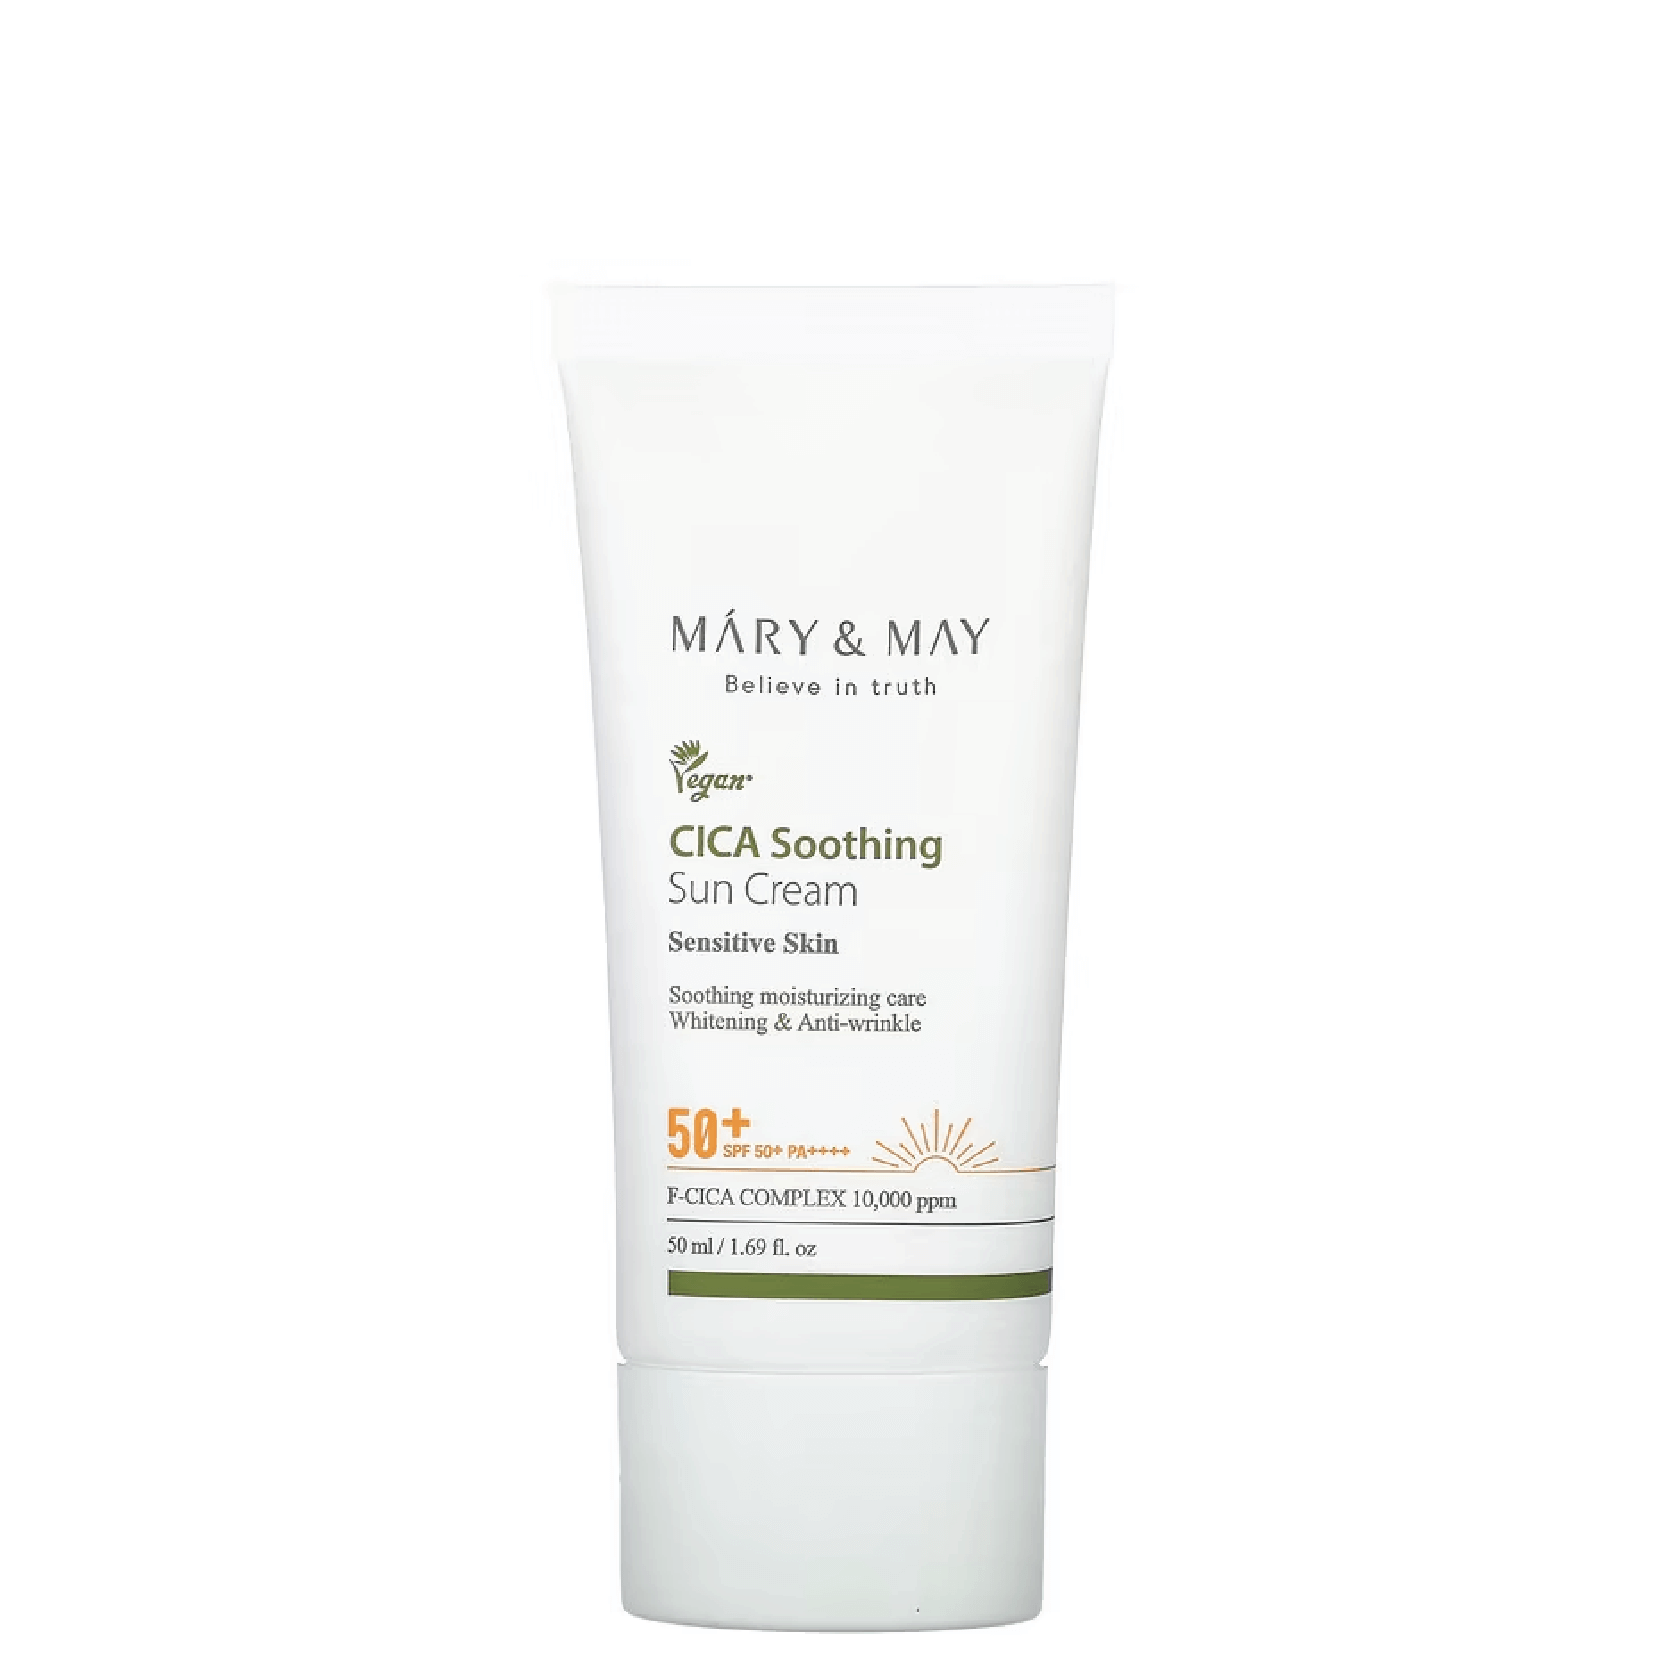 Mary & May CICA Soothing Sun Cream SPF50+ PA++++ Mary&May